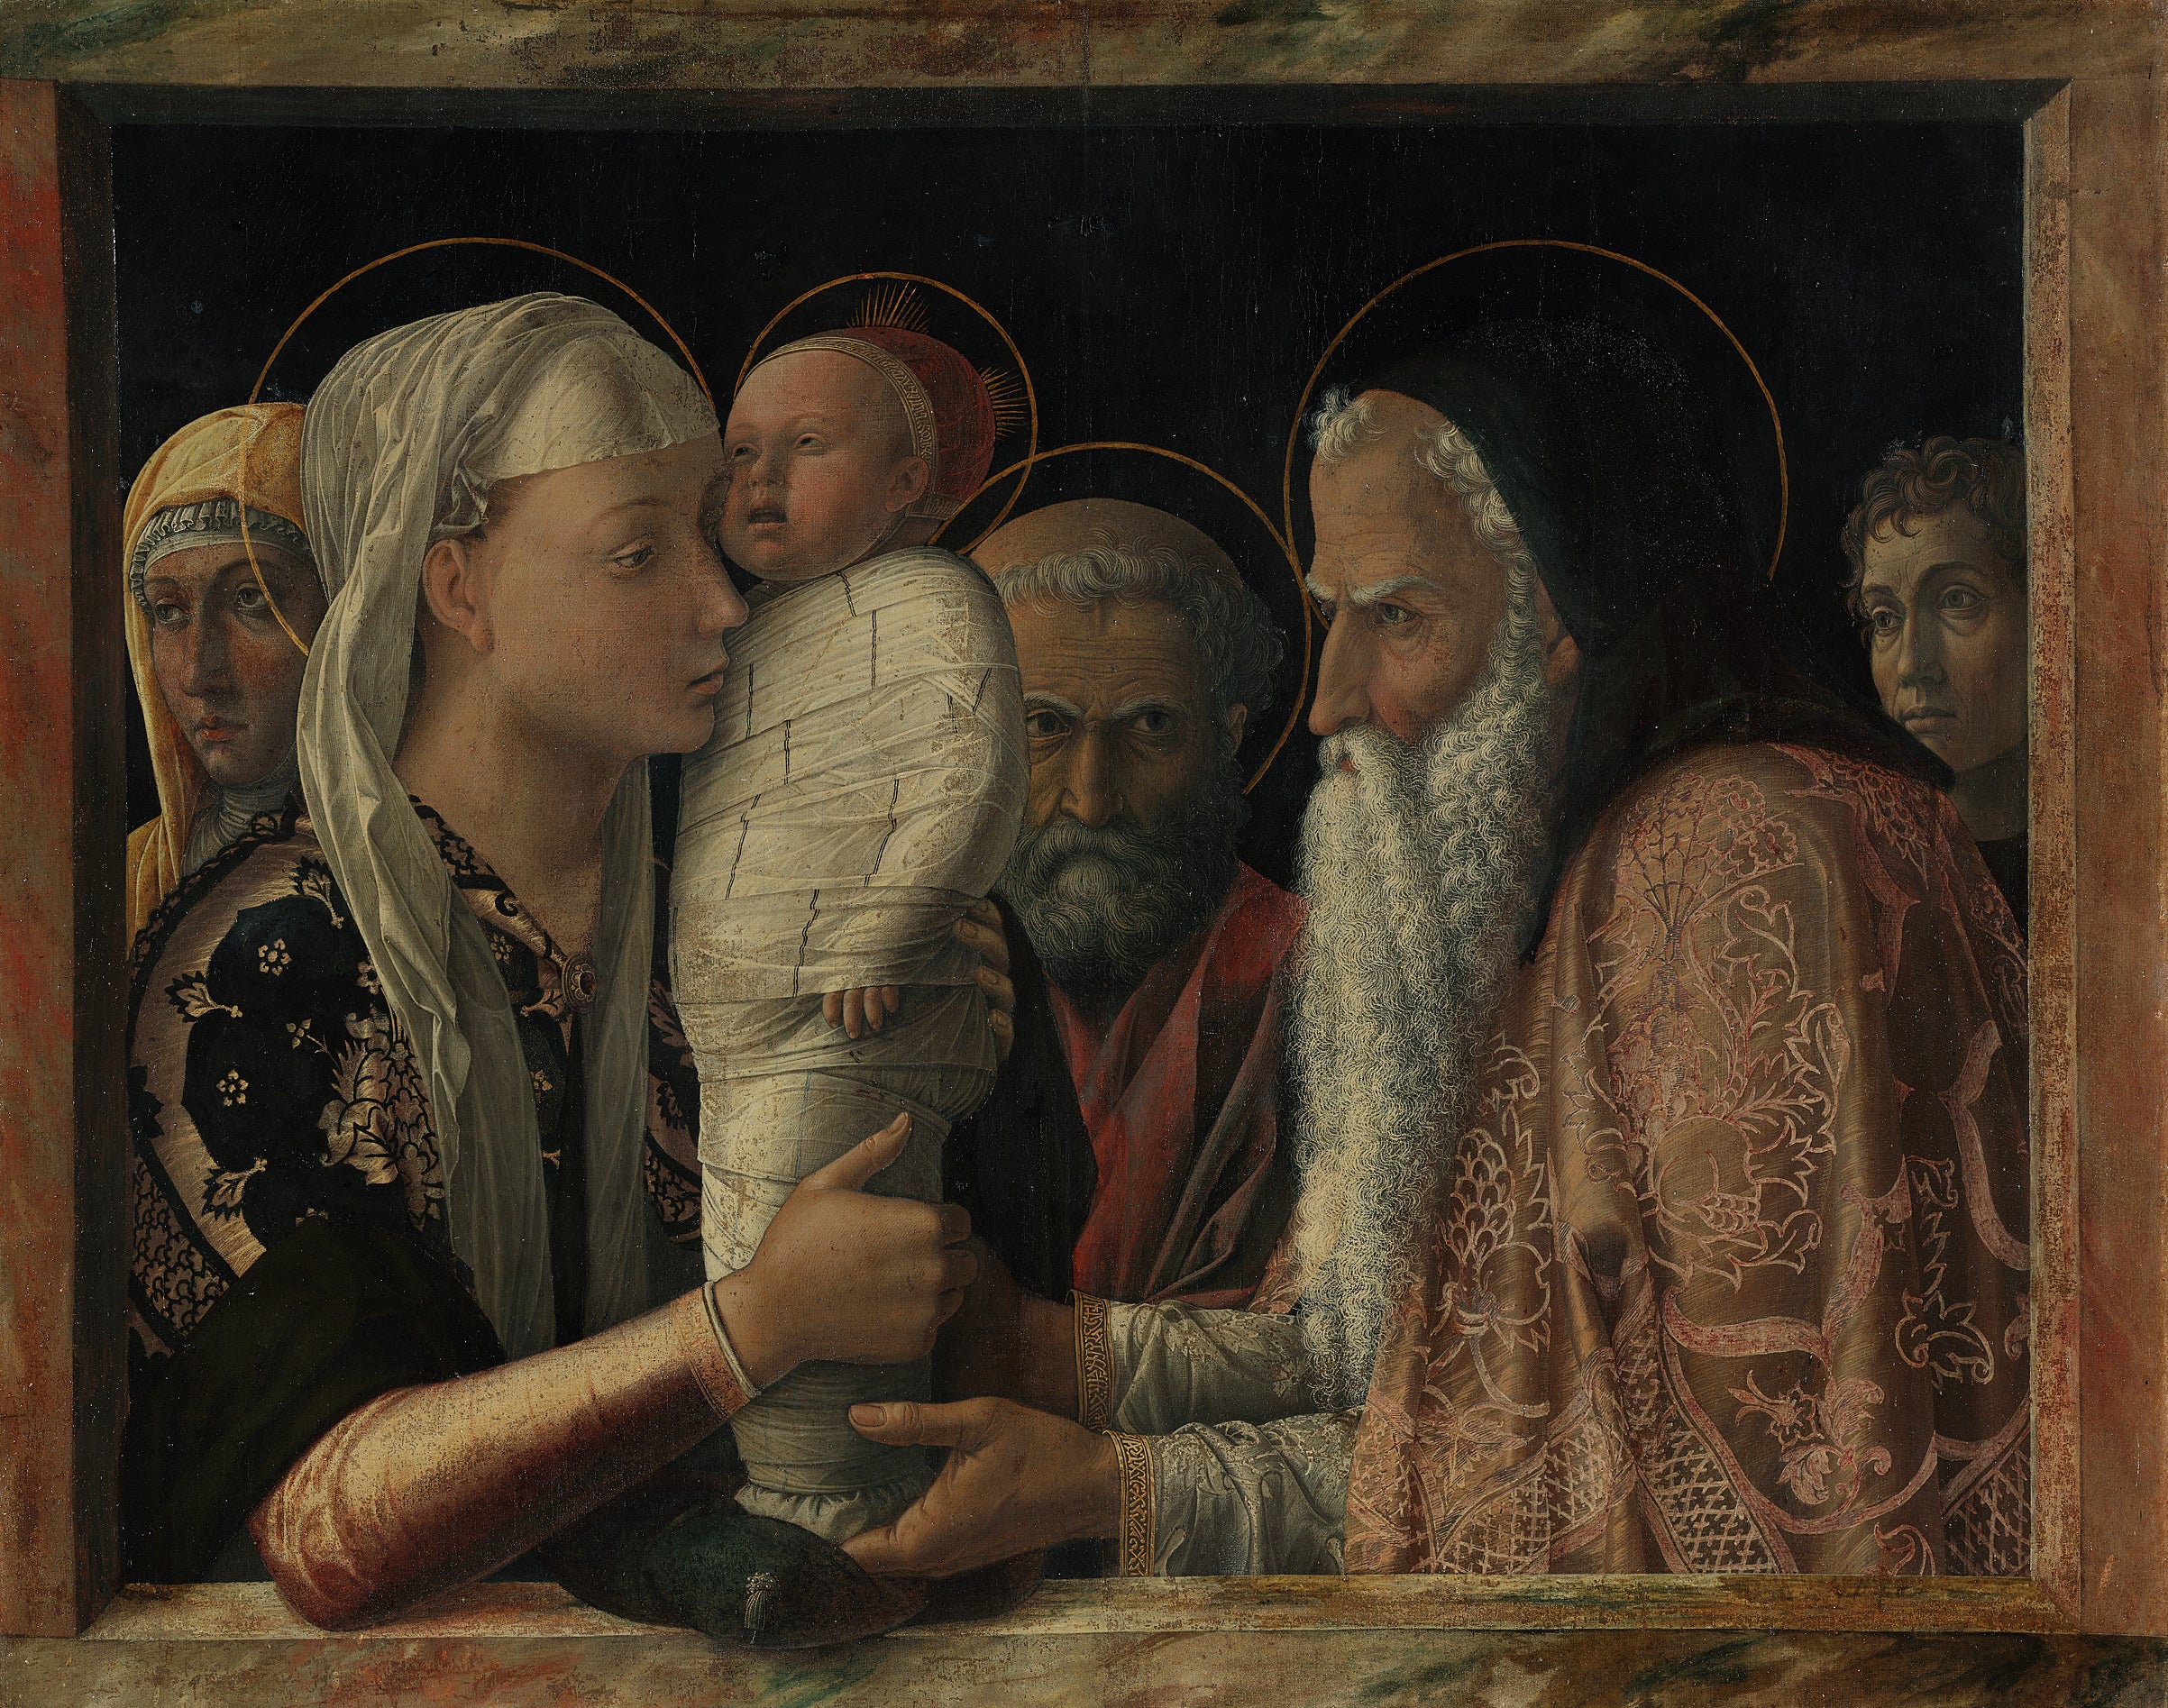 Andrea Mantegna, ‘The Presentation of Christ in the Temple’, about 1454 (Staatliche Museen zu Berlin, Gemäldegalerie/ Christoph Schmidt)